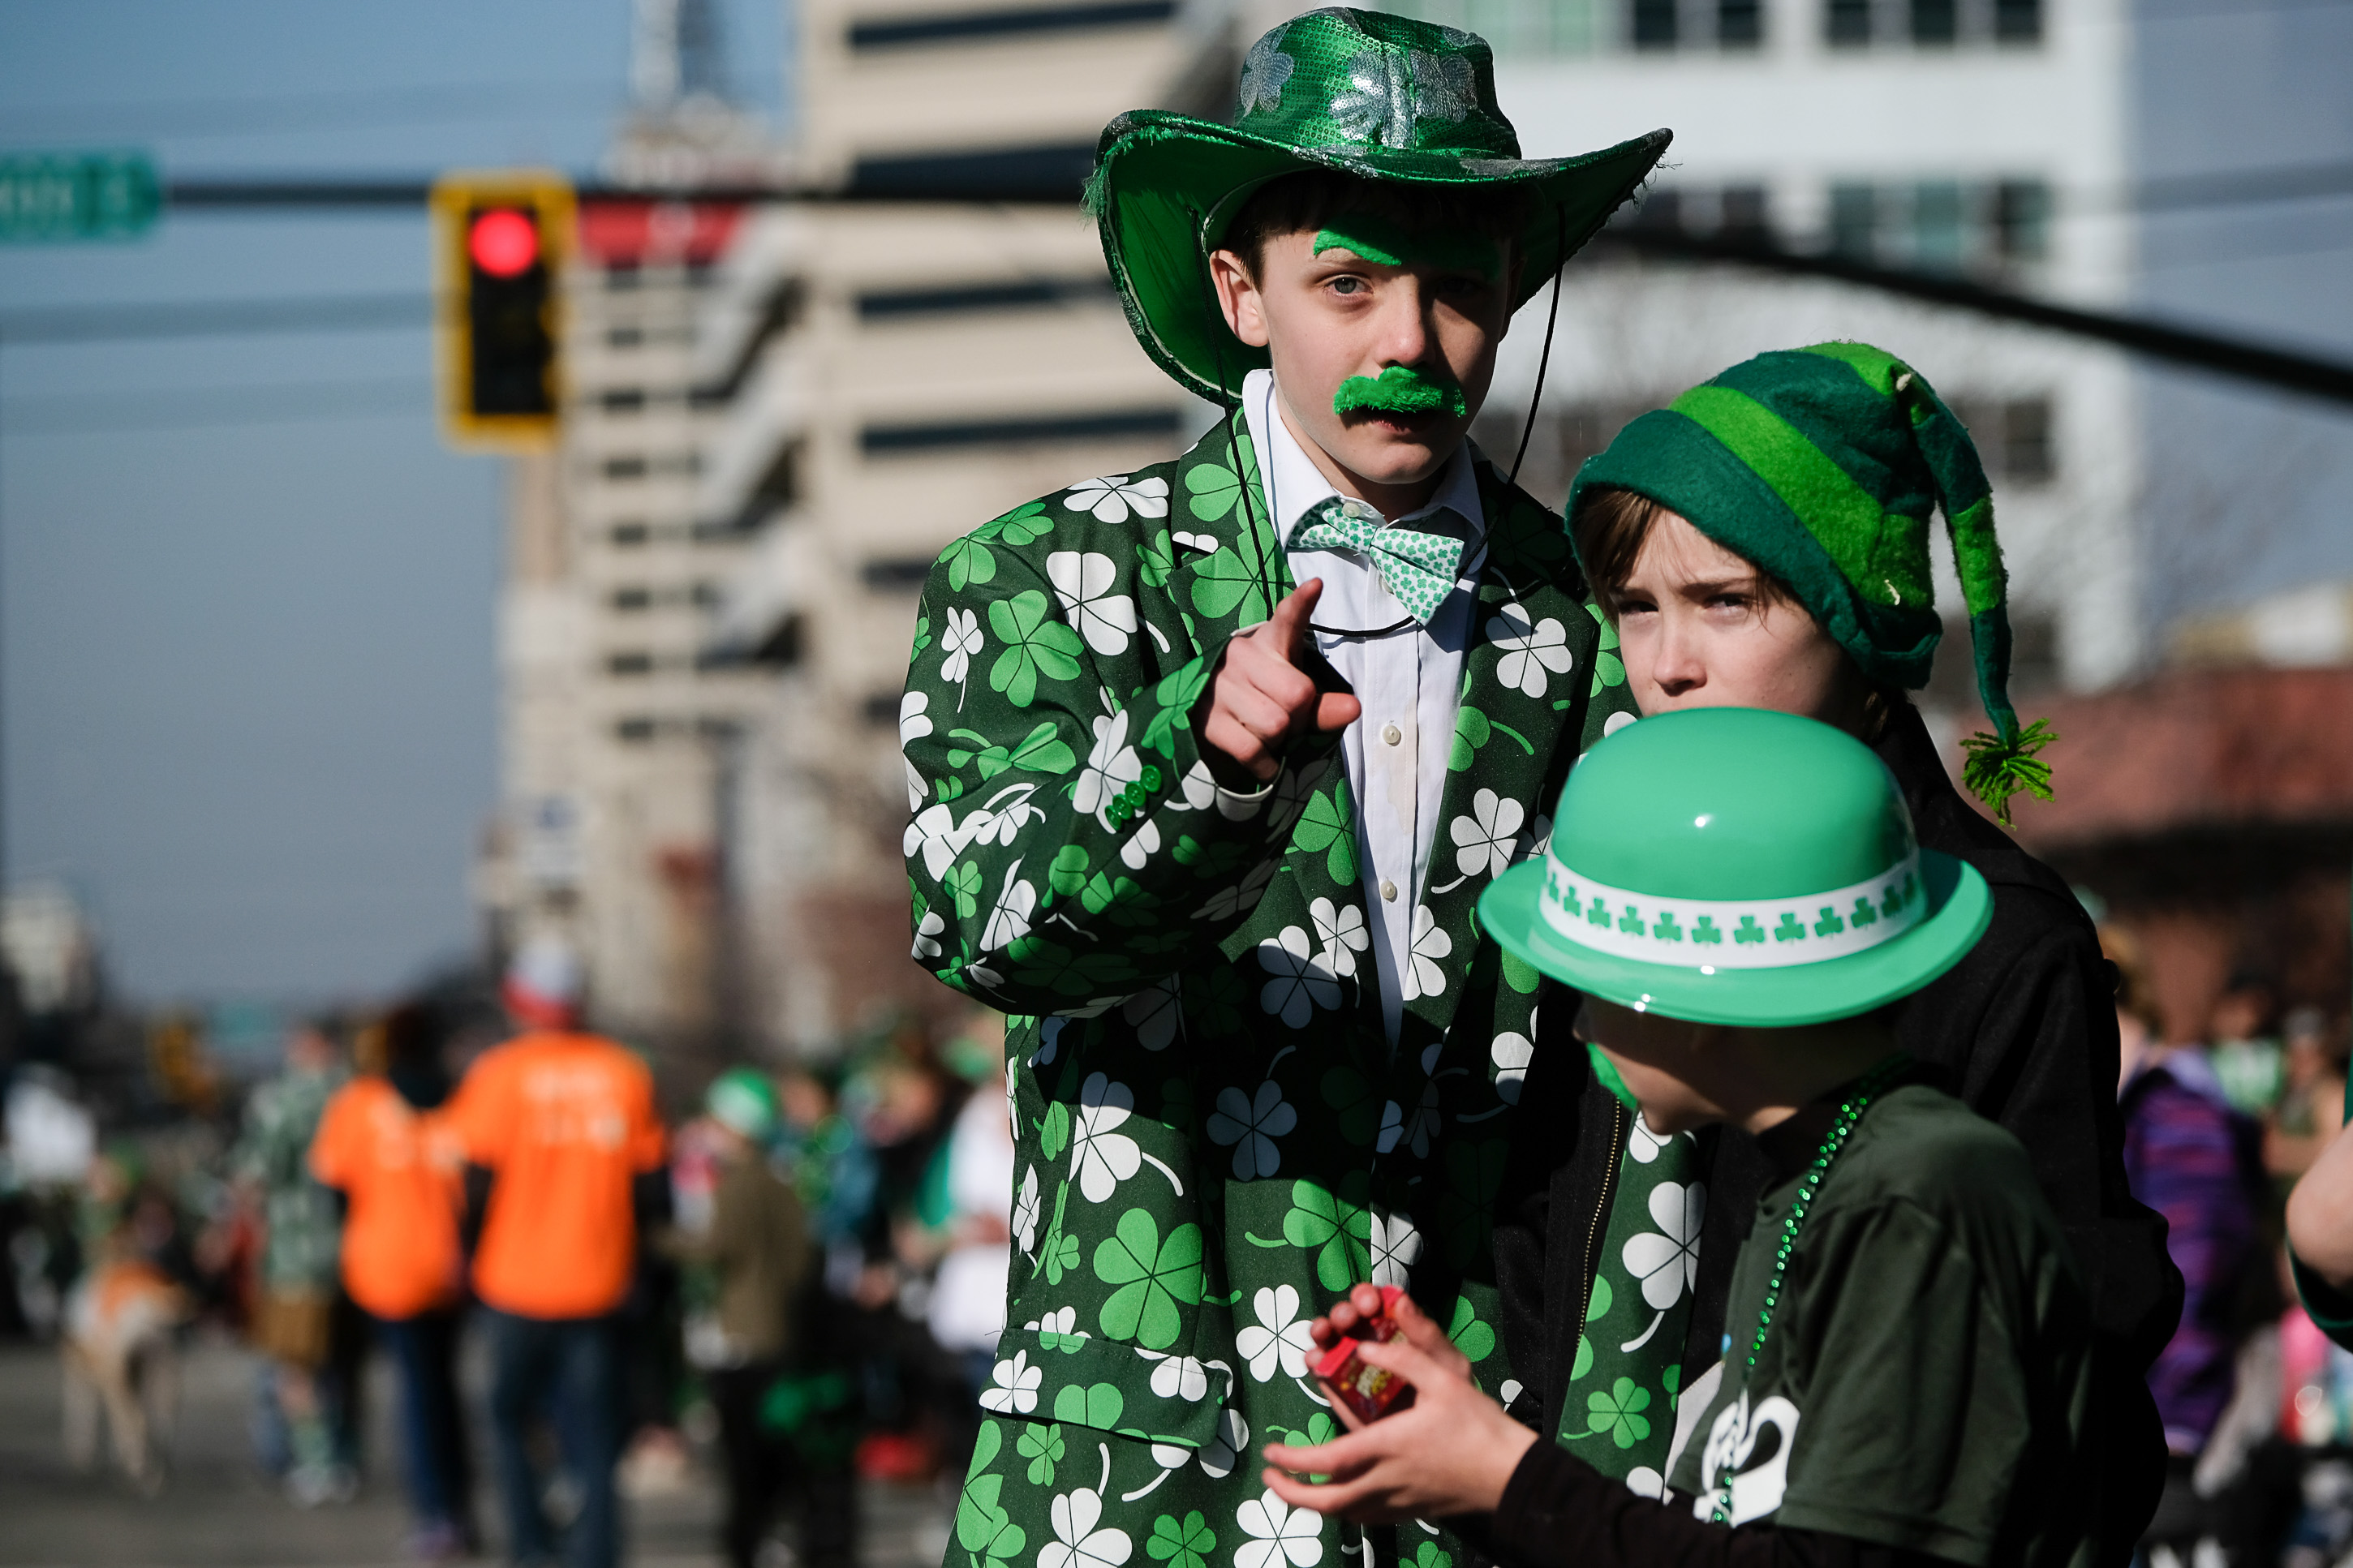 St. Patrick's Day events: Here's where you can celebrate the Irish holiday